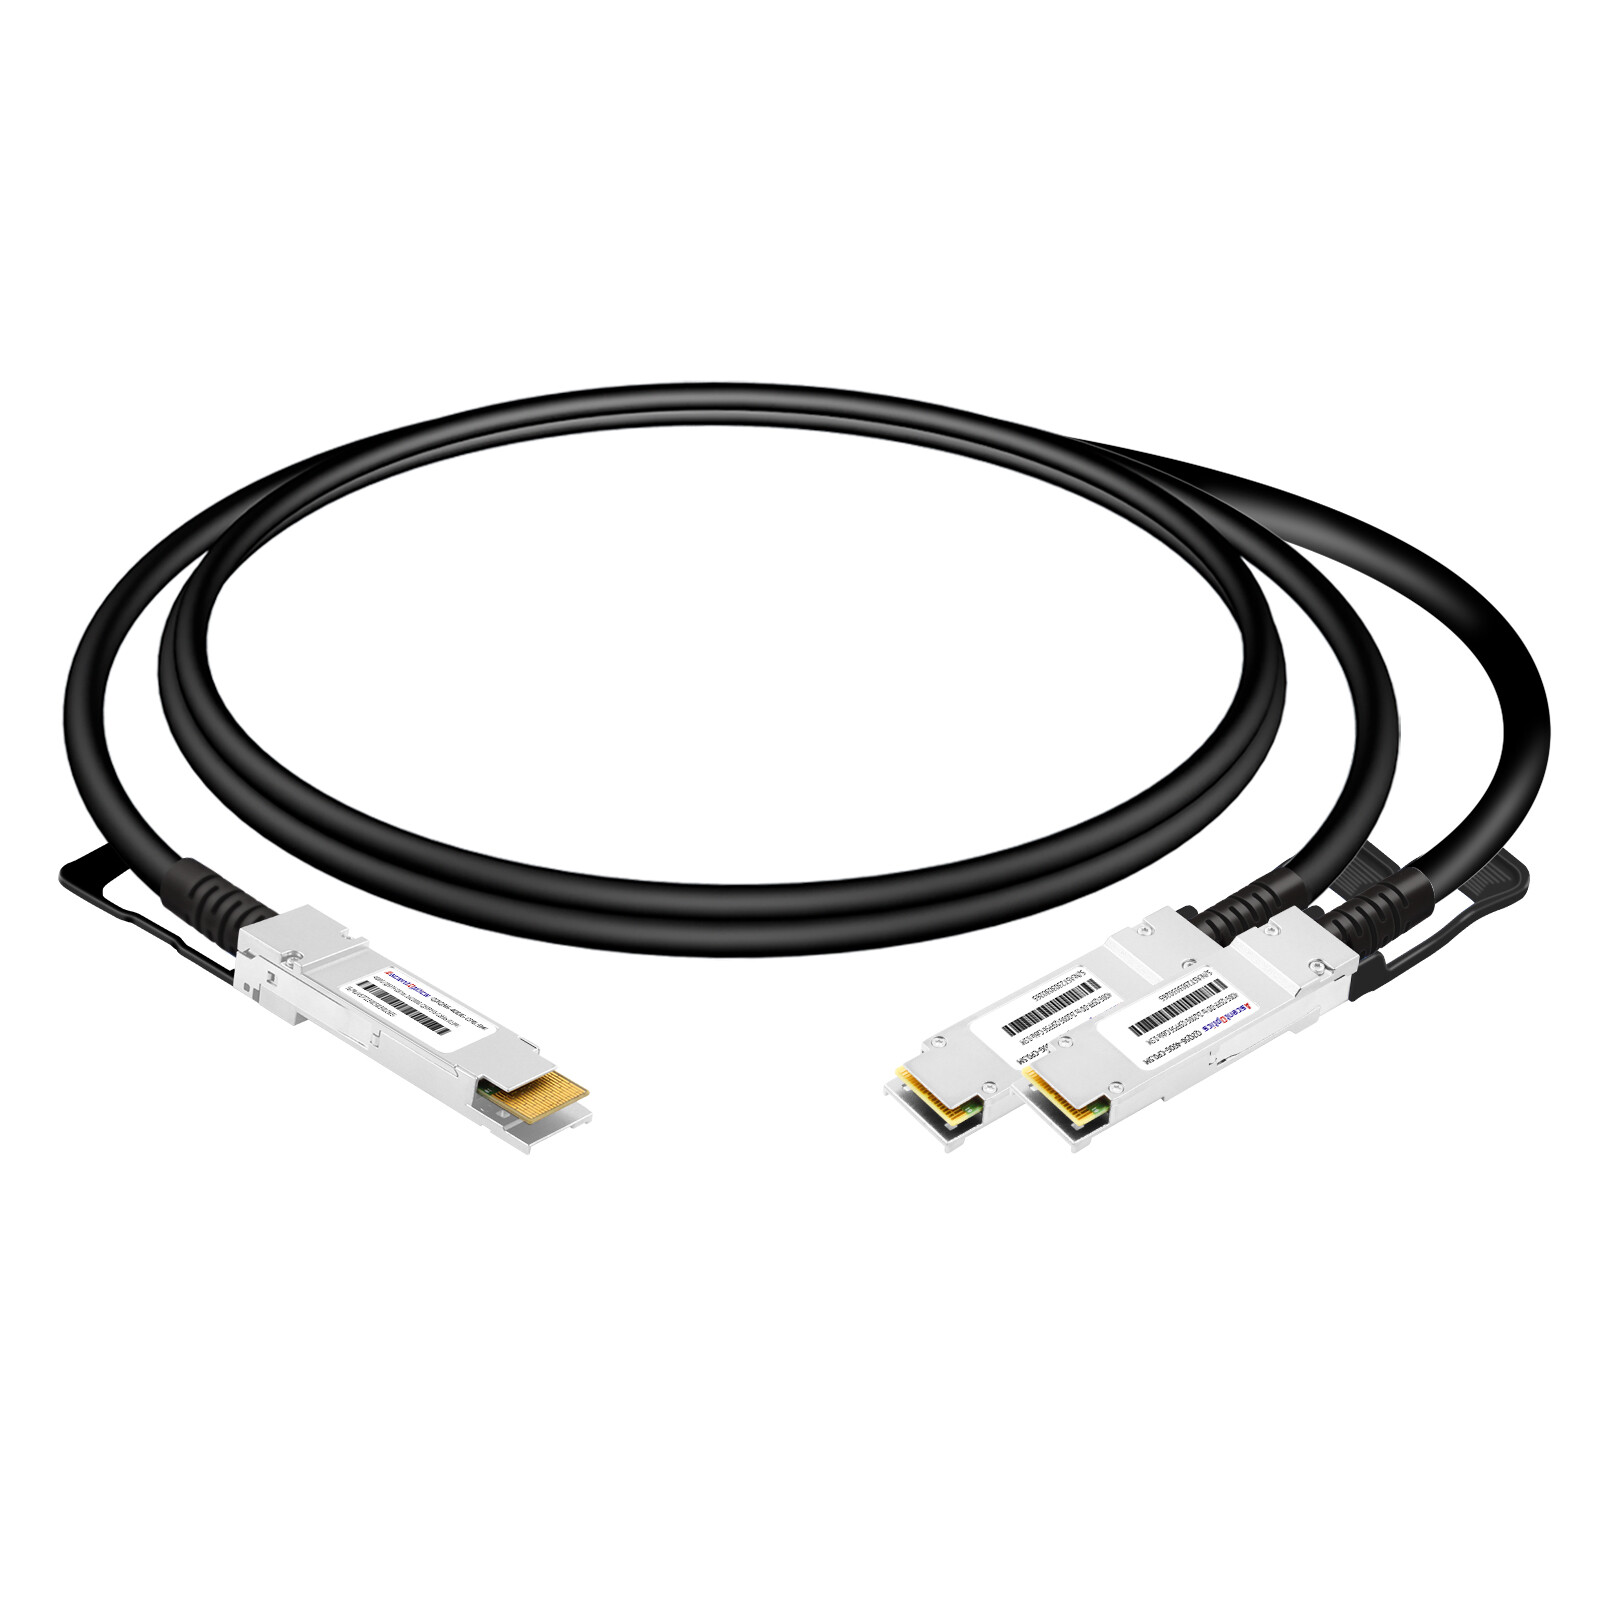 400G QSFP-DD to 4x 100G SFP-DD Copper Breakout Cable,1 Meter,Passive